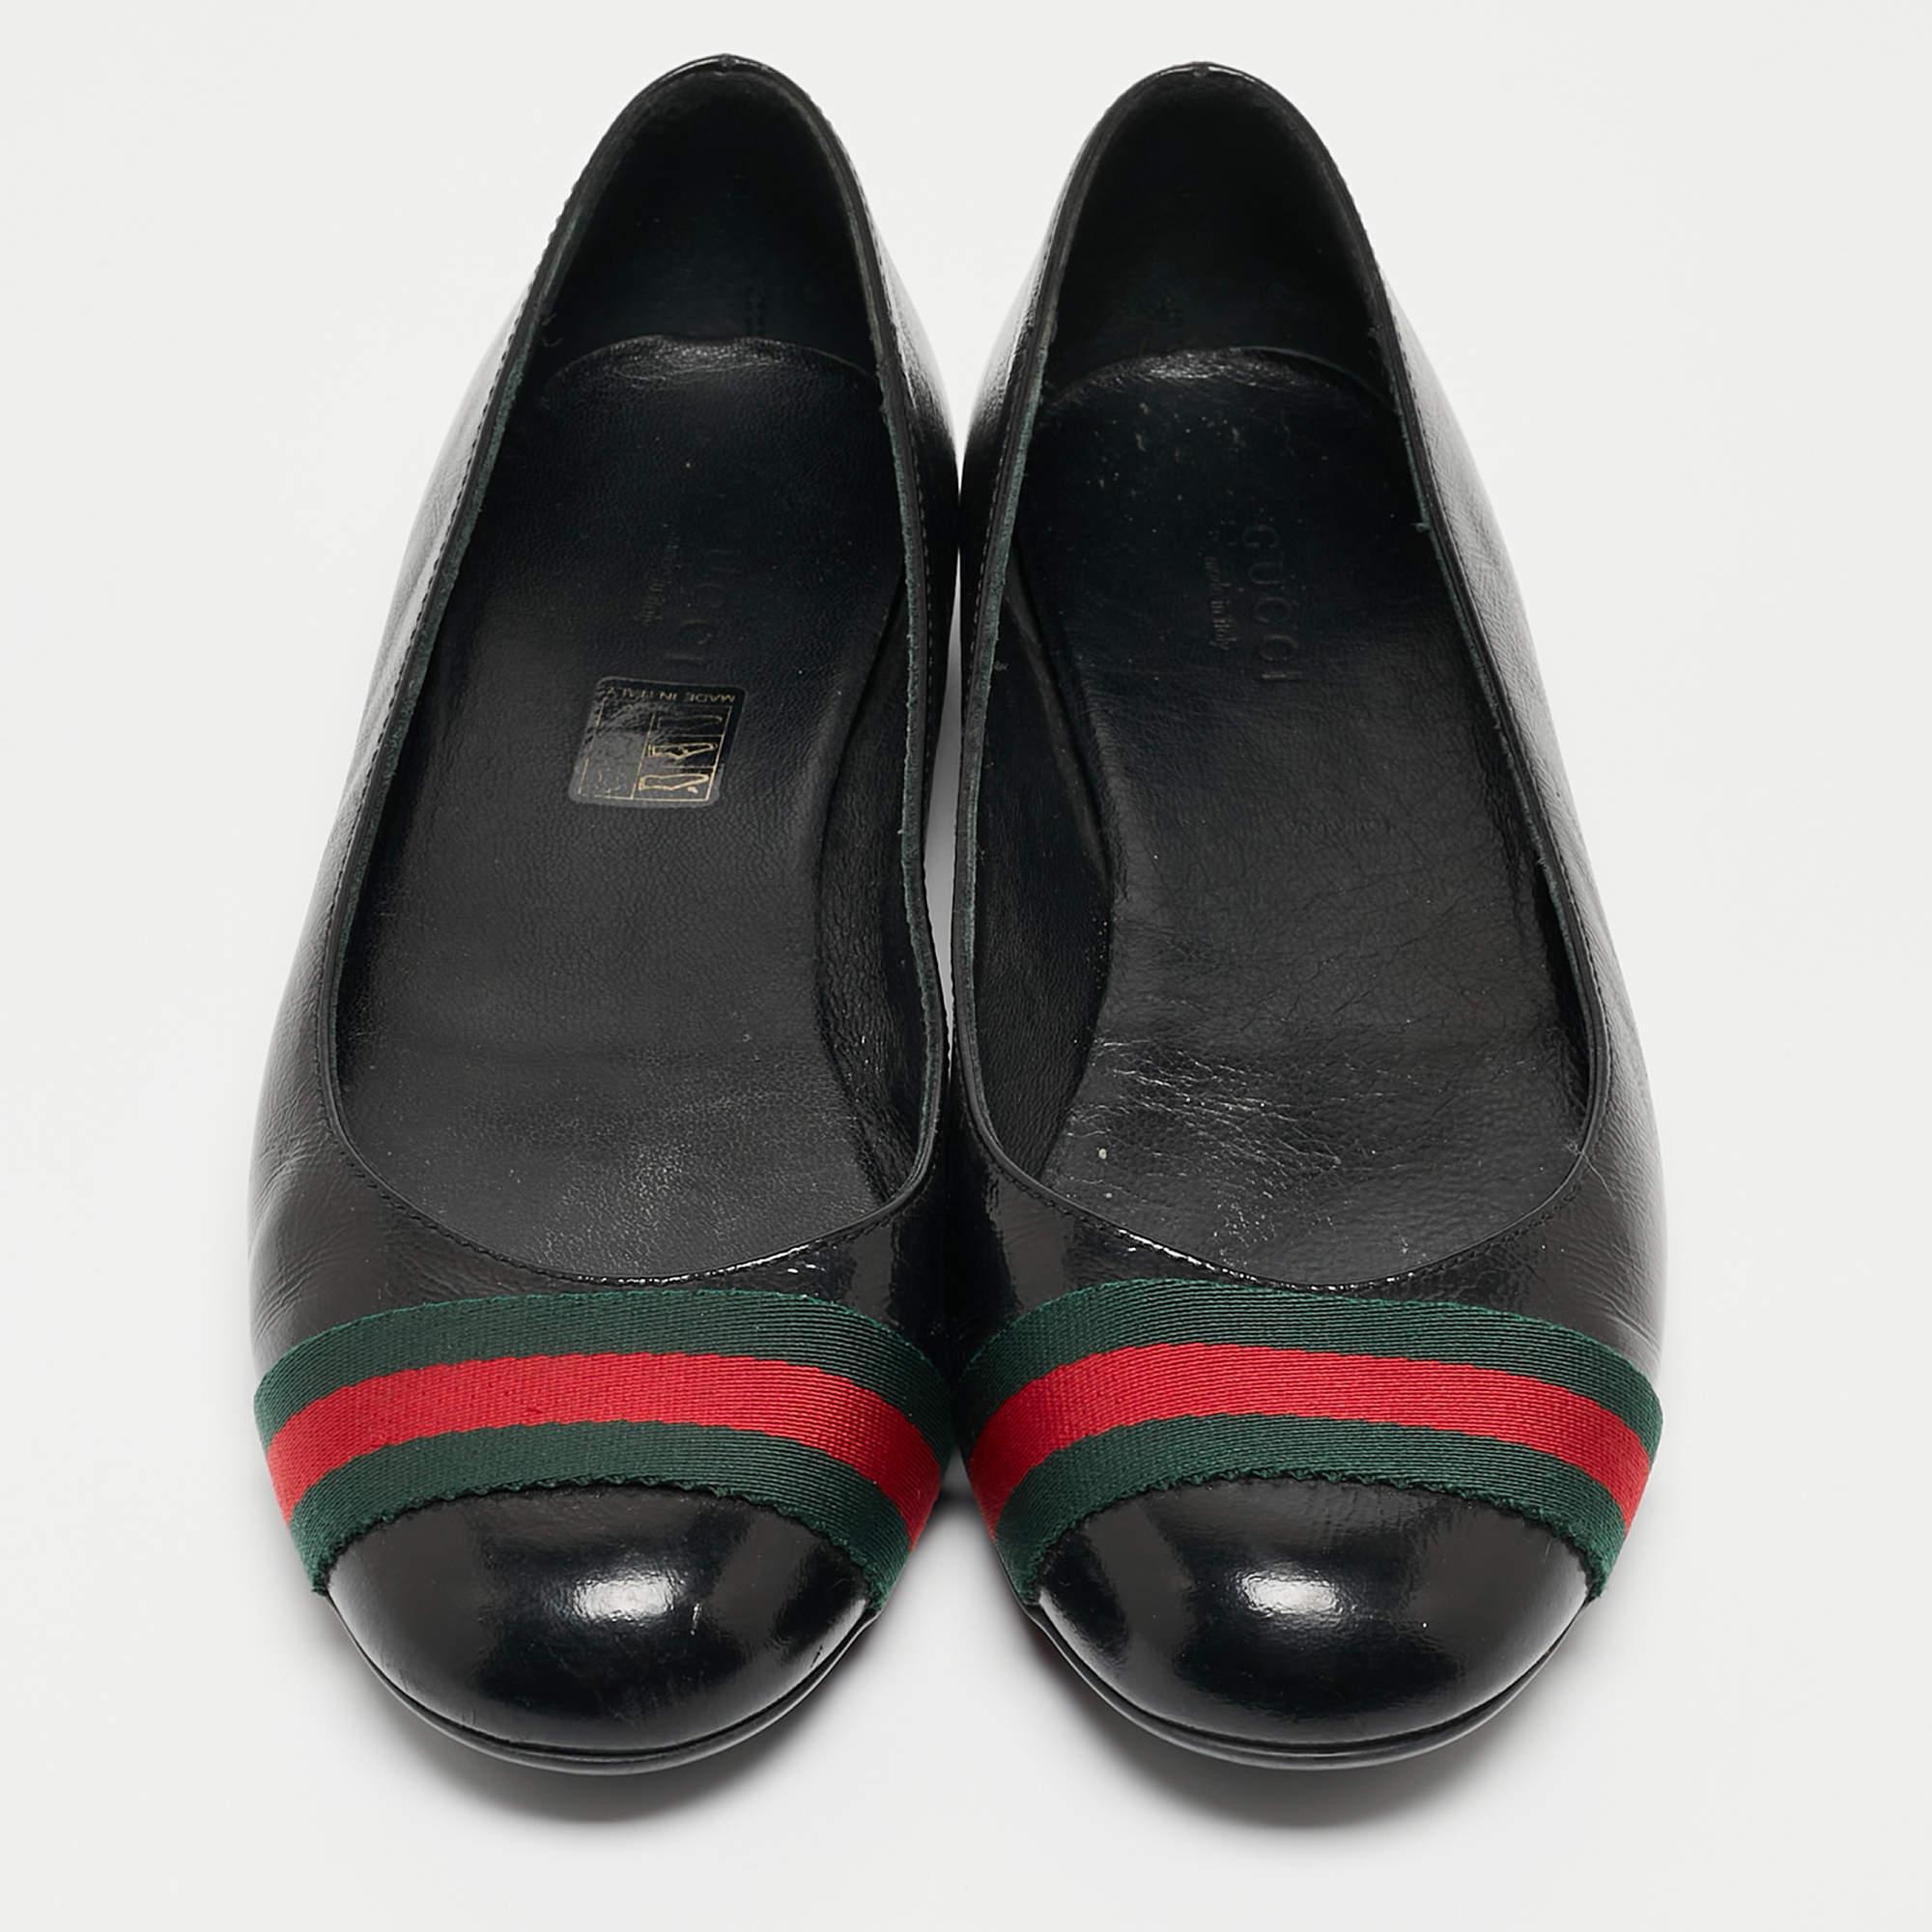 These black Gucci ballet flats are simply elegant and luxe. Crafted from leather, they have Web-detailed round toes for that Gucci look and leather insoles for maximum ease when you walk.

